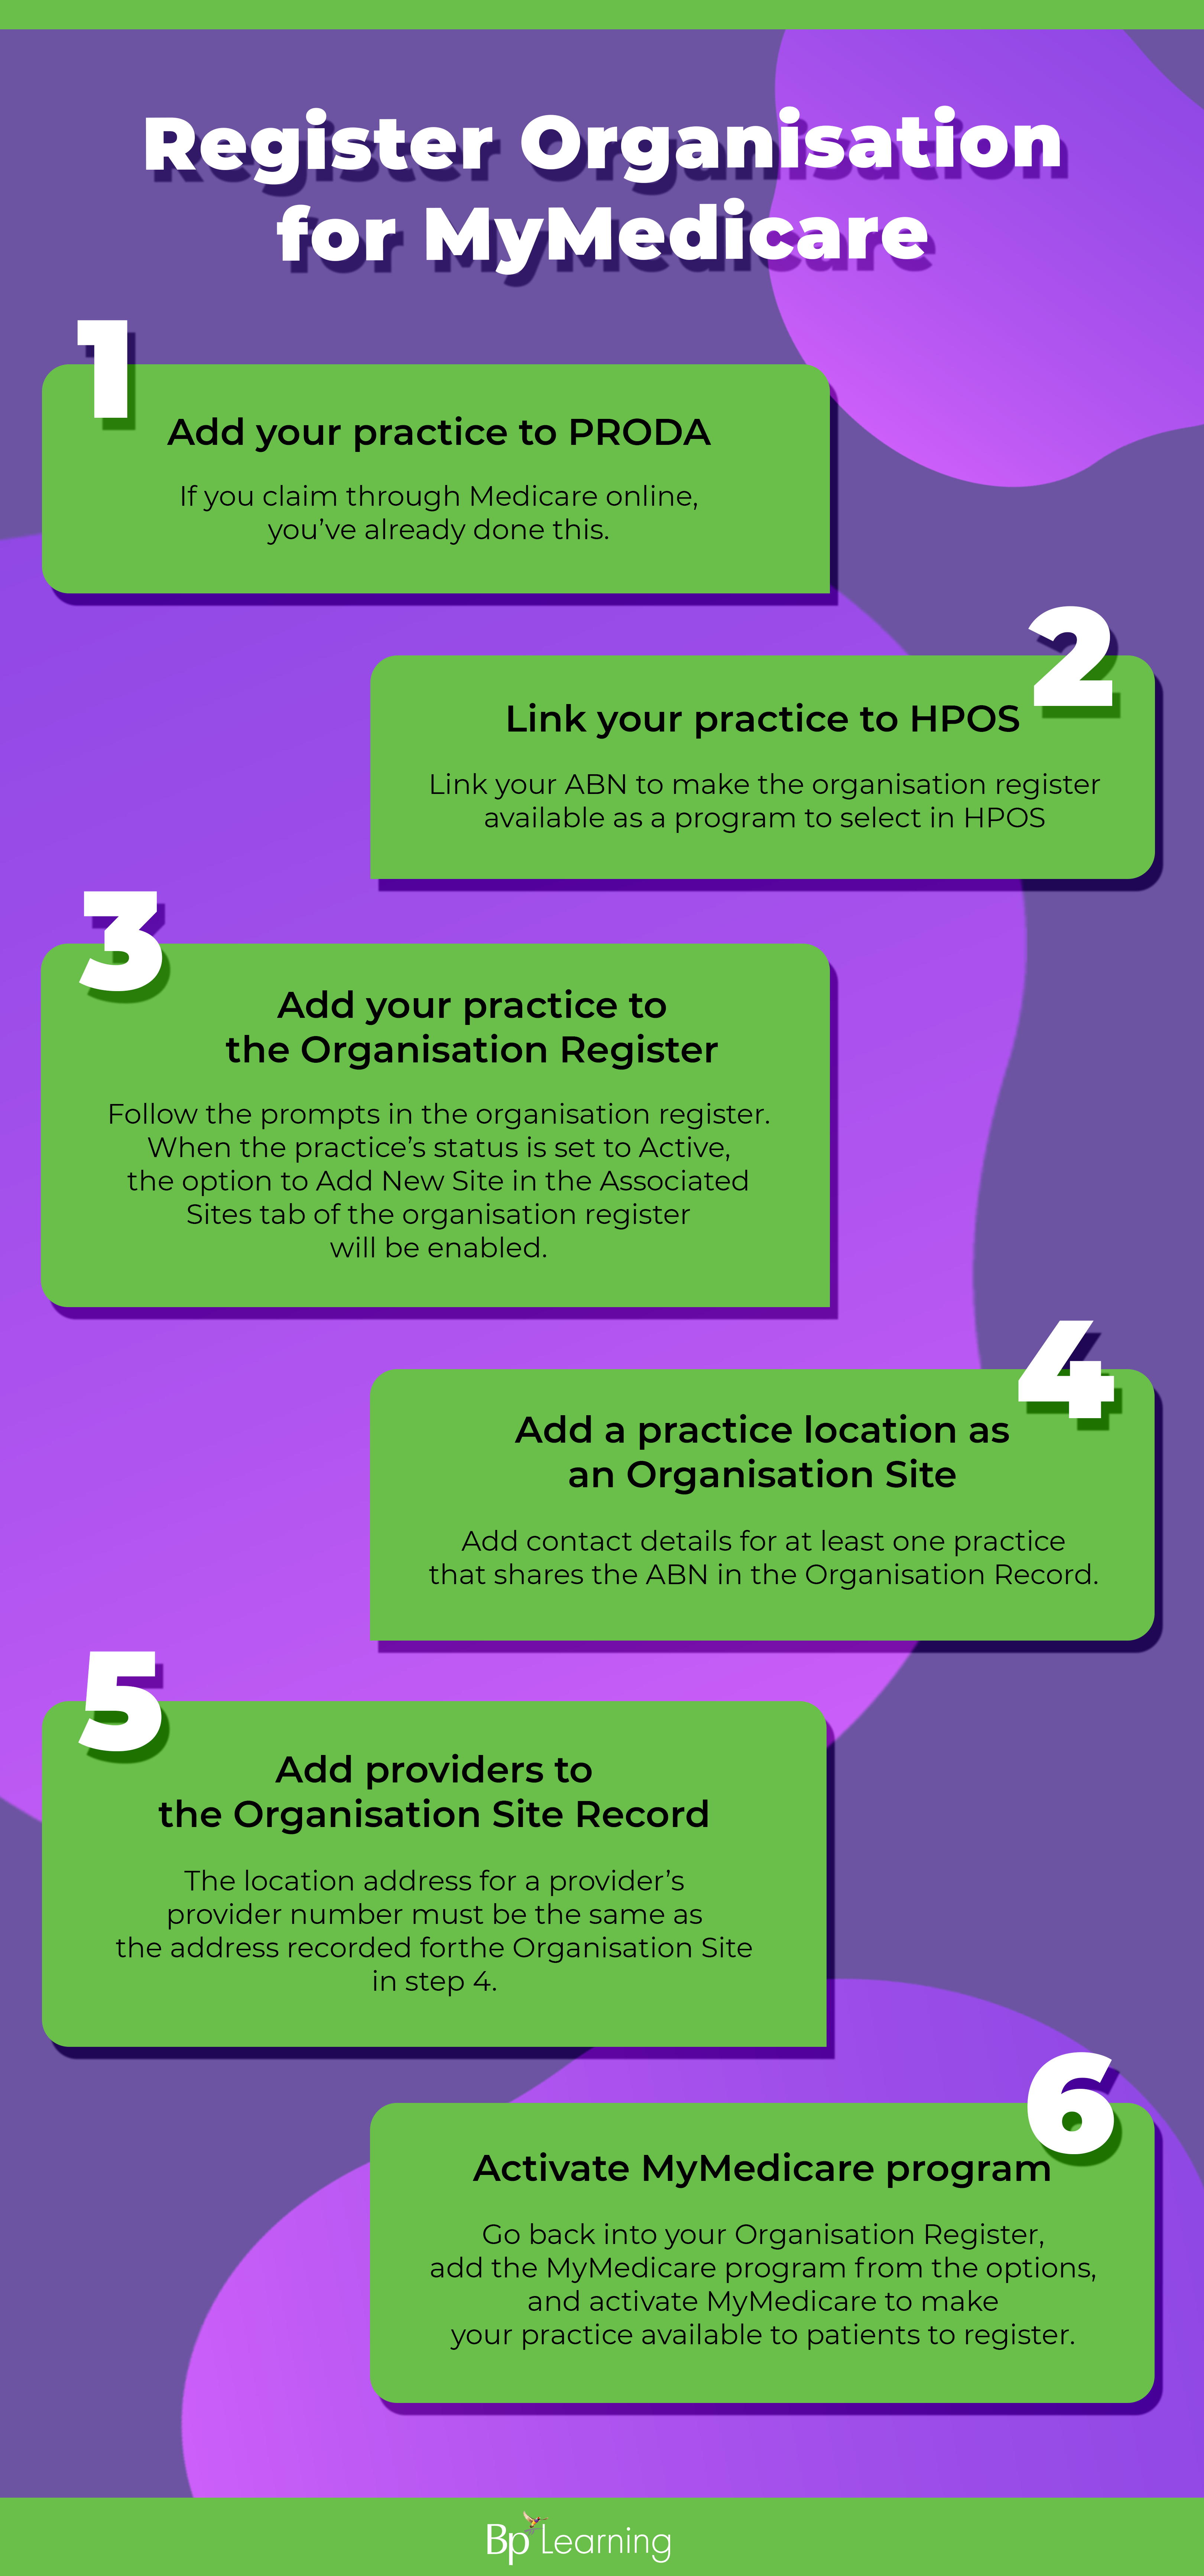 Steps for registering your practice with MyMedicare